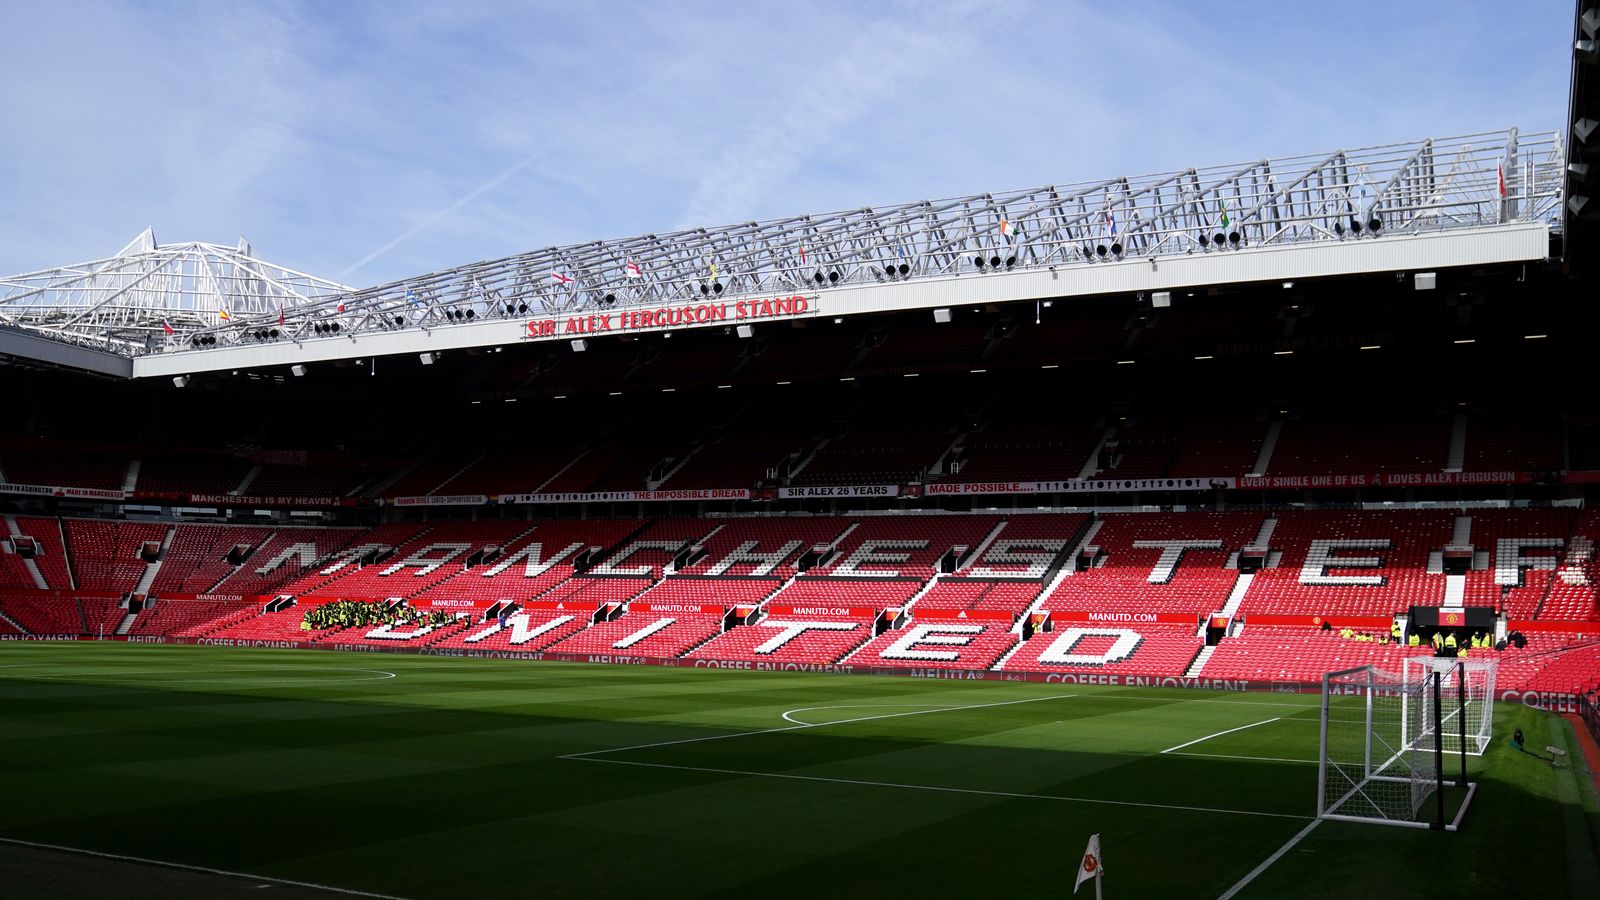 Manchester United sale: Giant American financial investor Carlyle in talks over acquiring minority stake | Football News